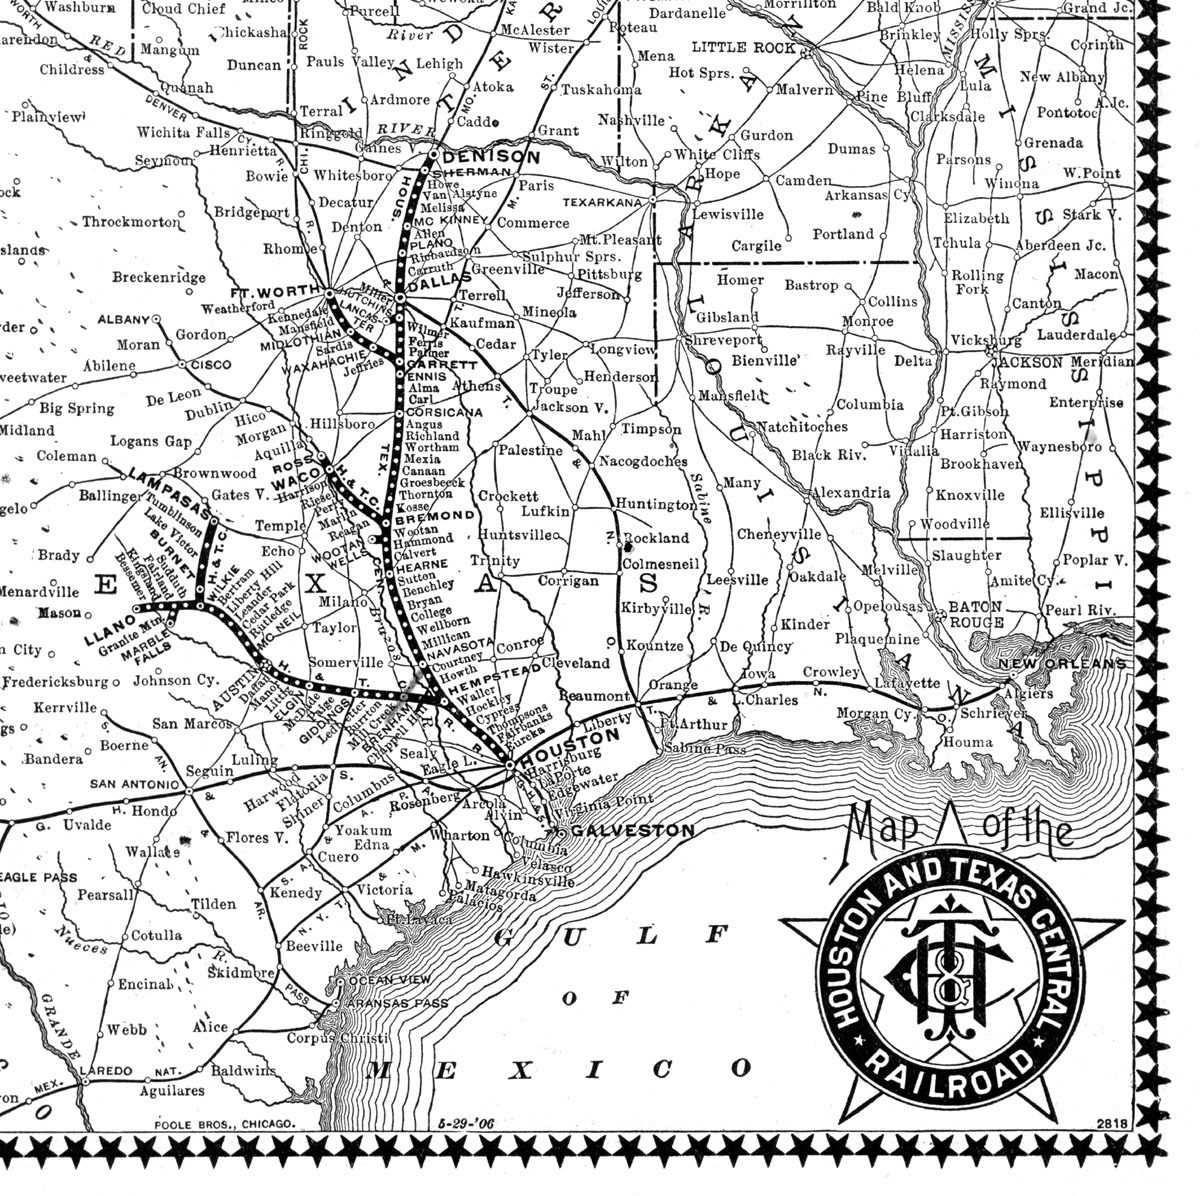 Houston & Texas Central Railroad Company (Tex.), Public Timetable and Map Showing Route in 1906.